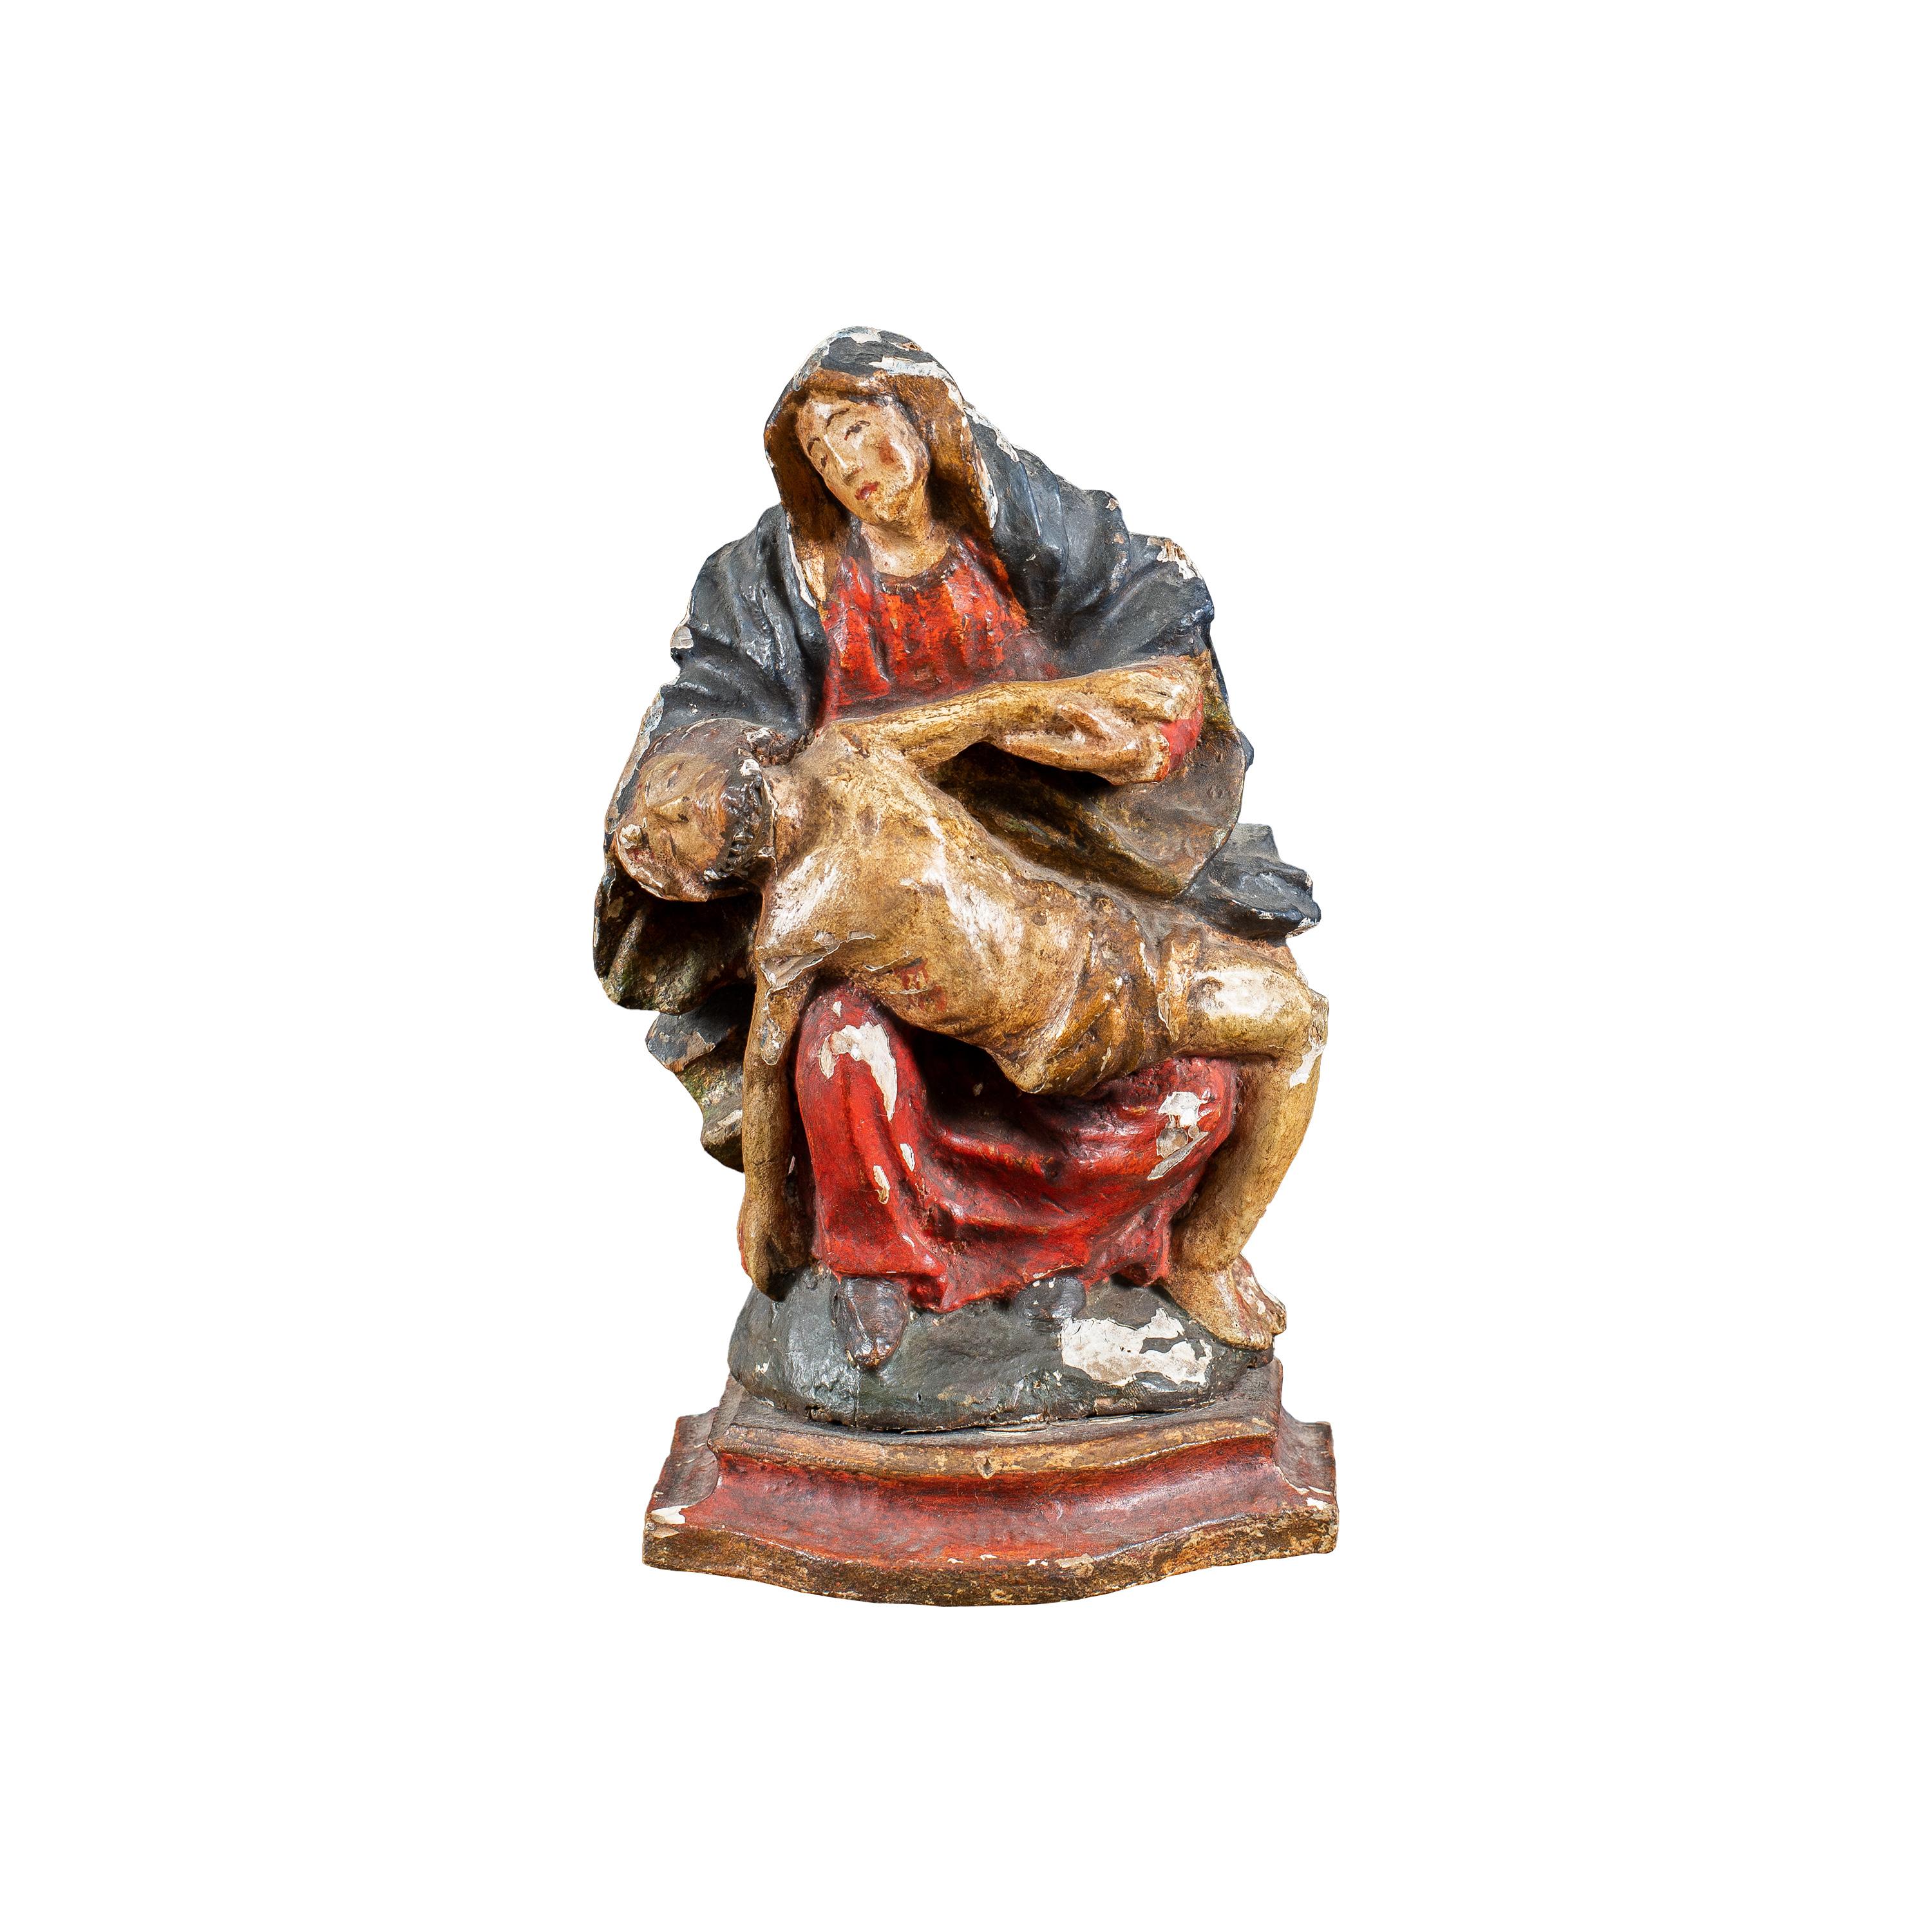 Unknown Figurative Sculpture - Italian master - 18th century figure sculpture - Virgin Pity - Carved Wood Paint